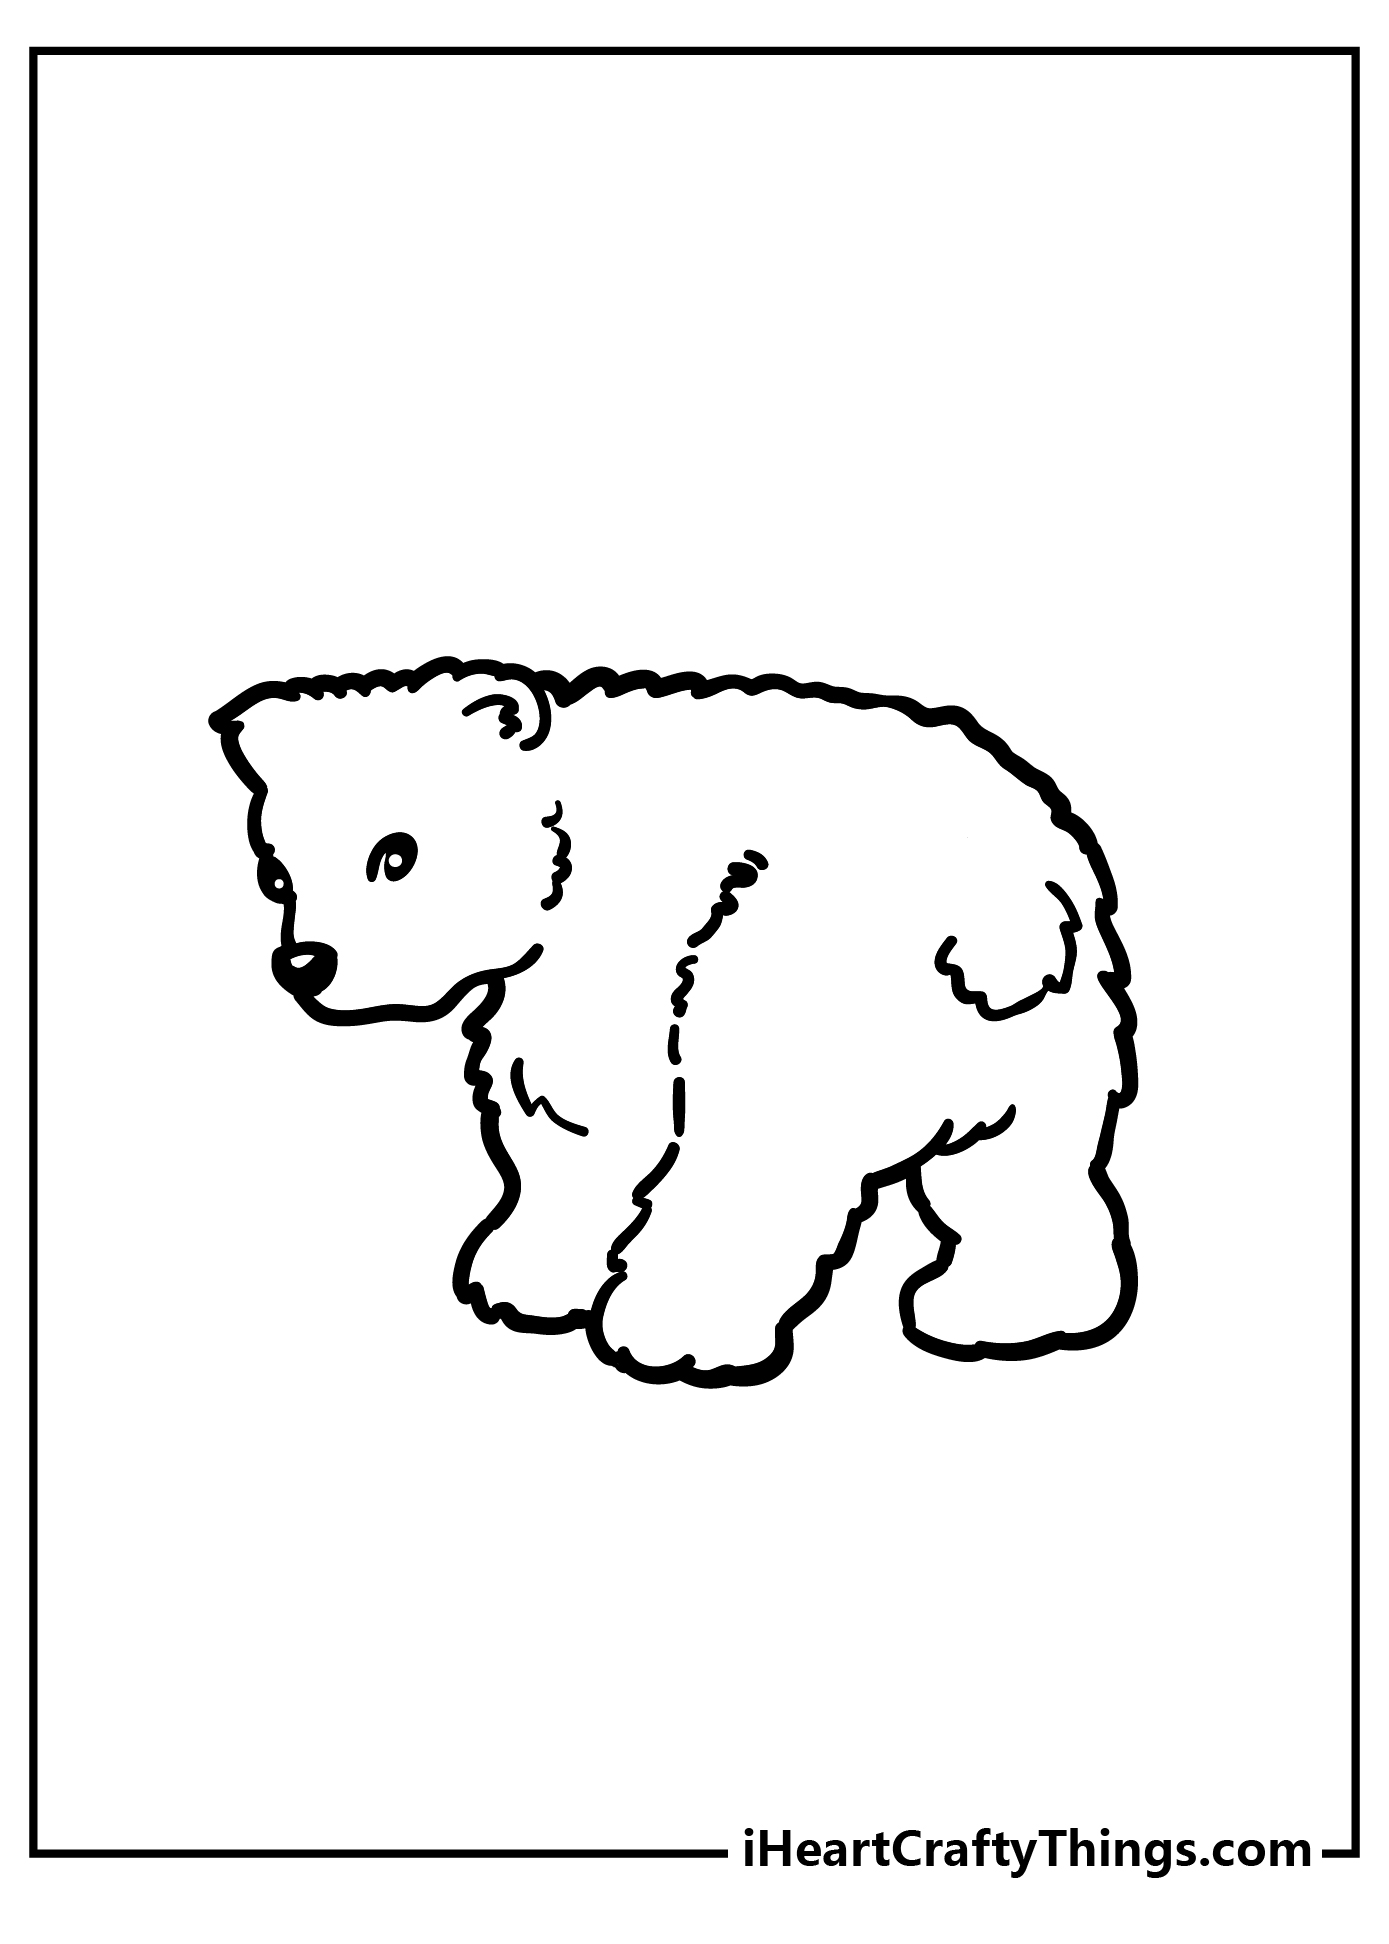 Forest Animals Coloring Pages for kids free download